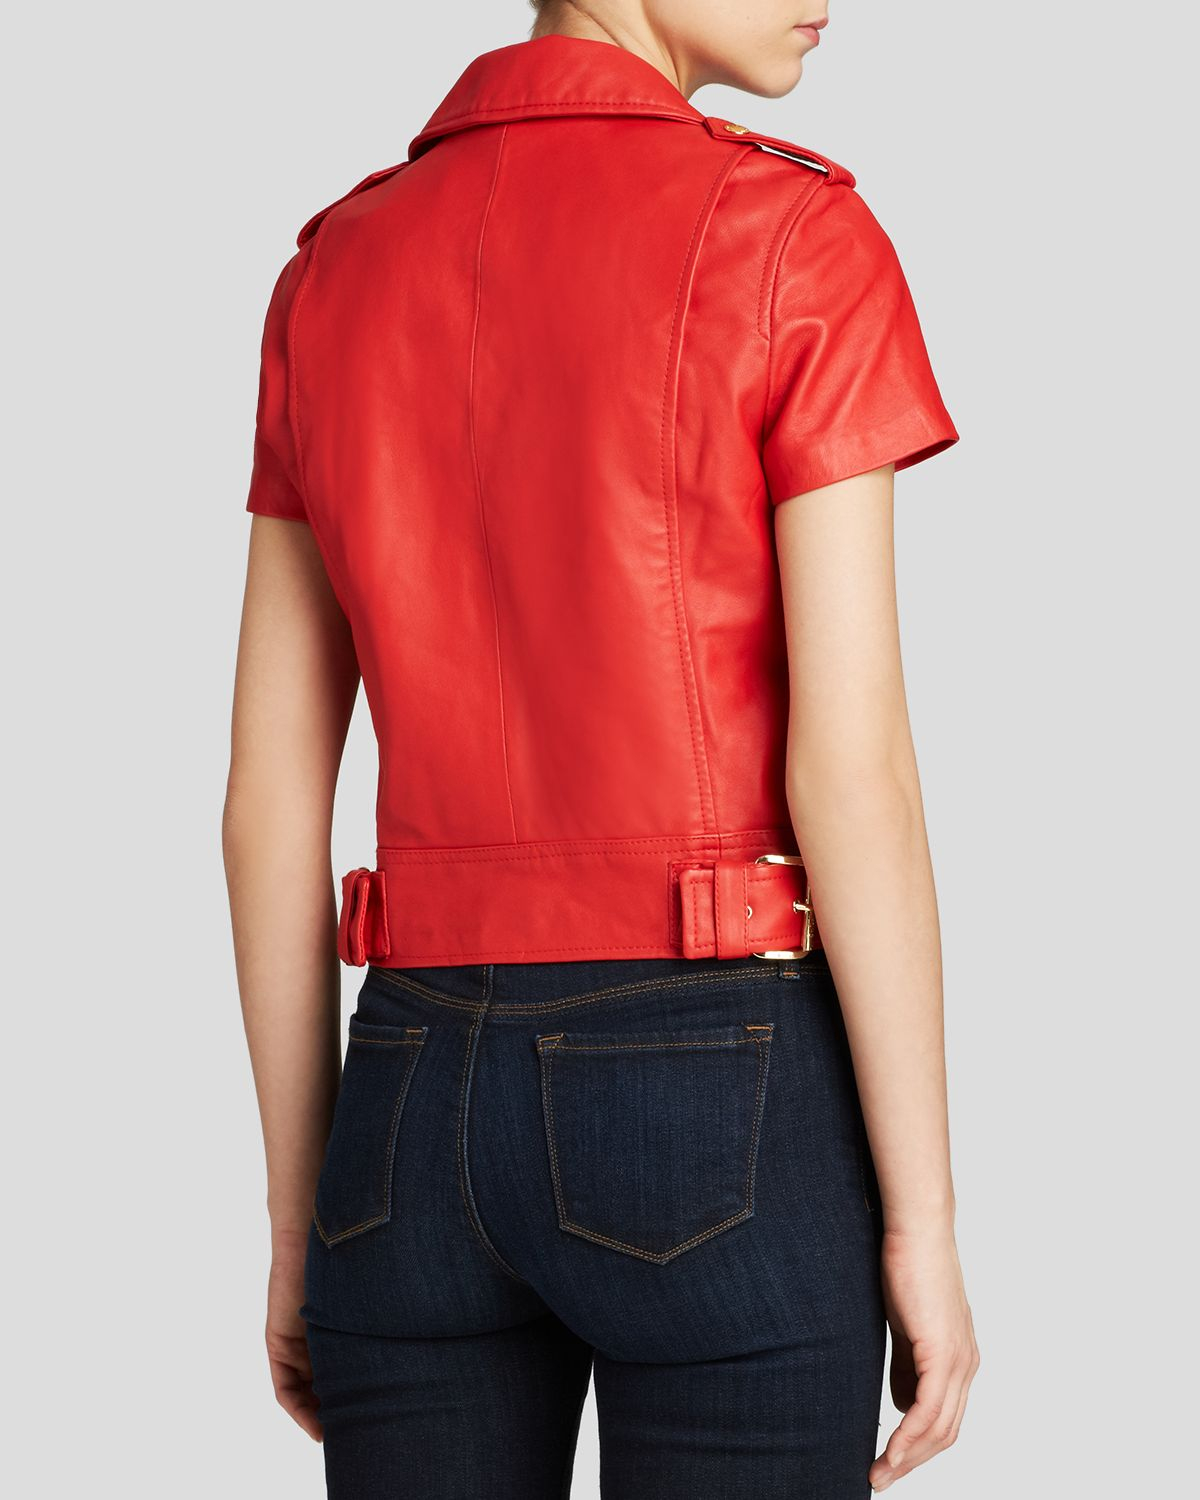 MICHAEL Michael Kors Short Sleeve Leather Moto Jacket in Red | Lyst